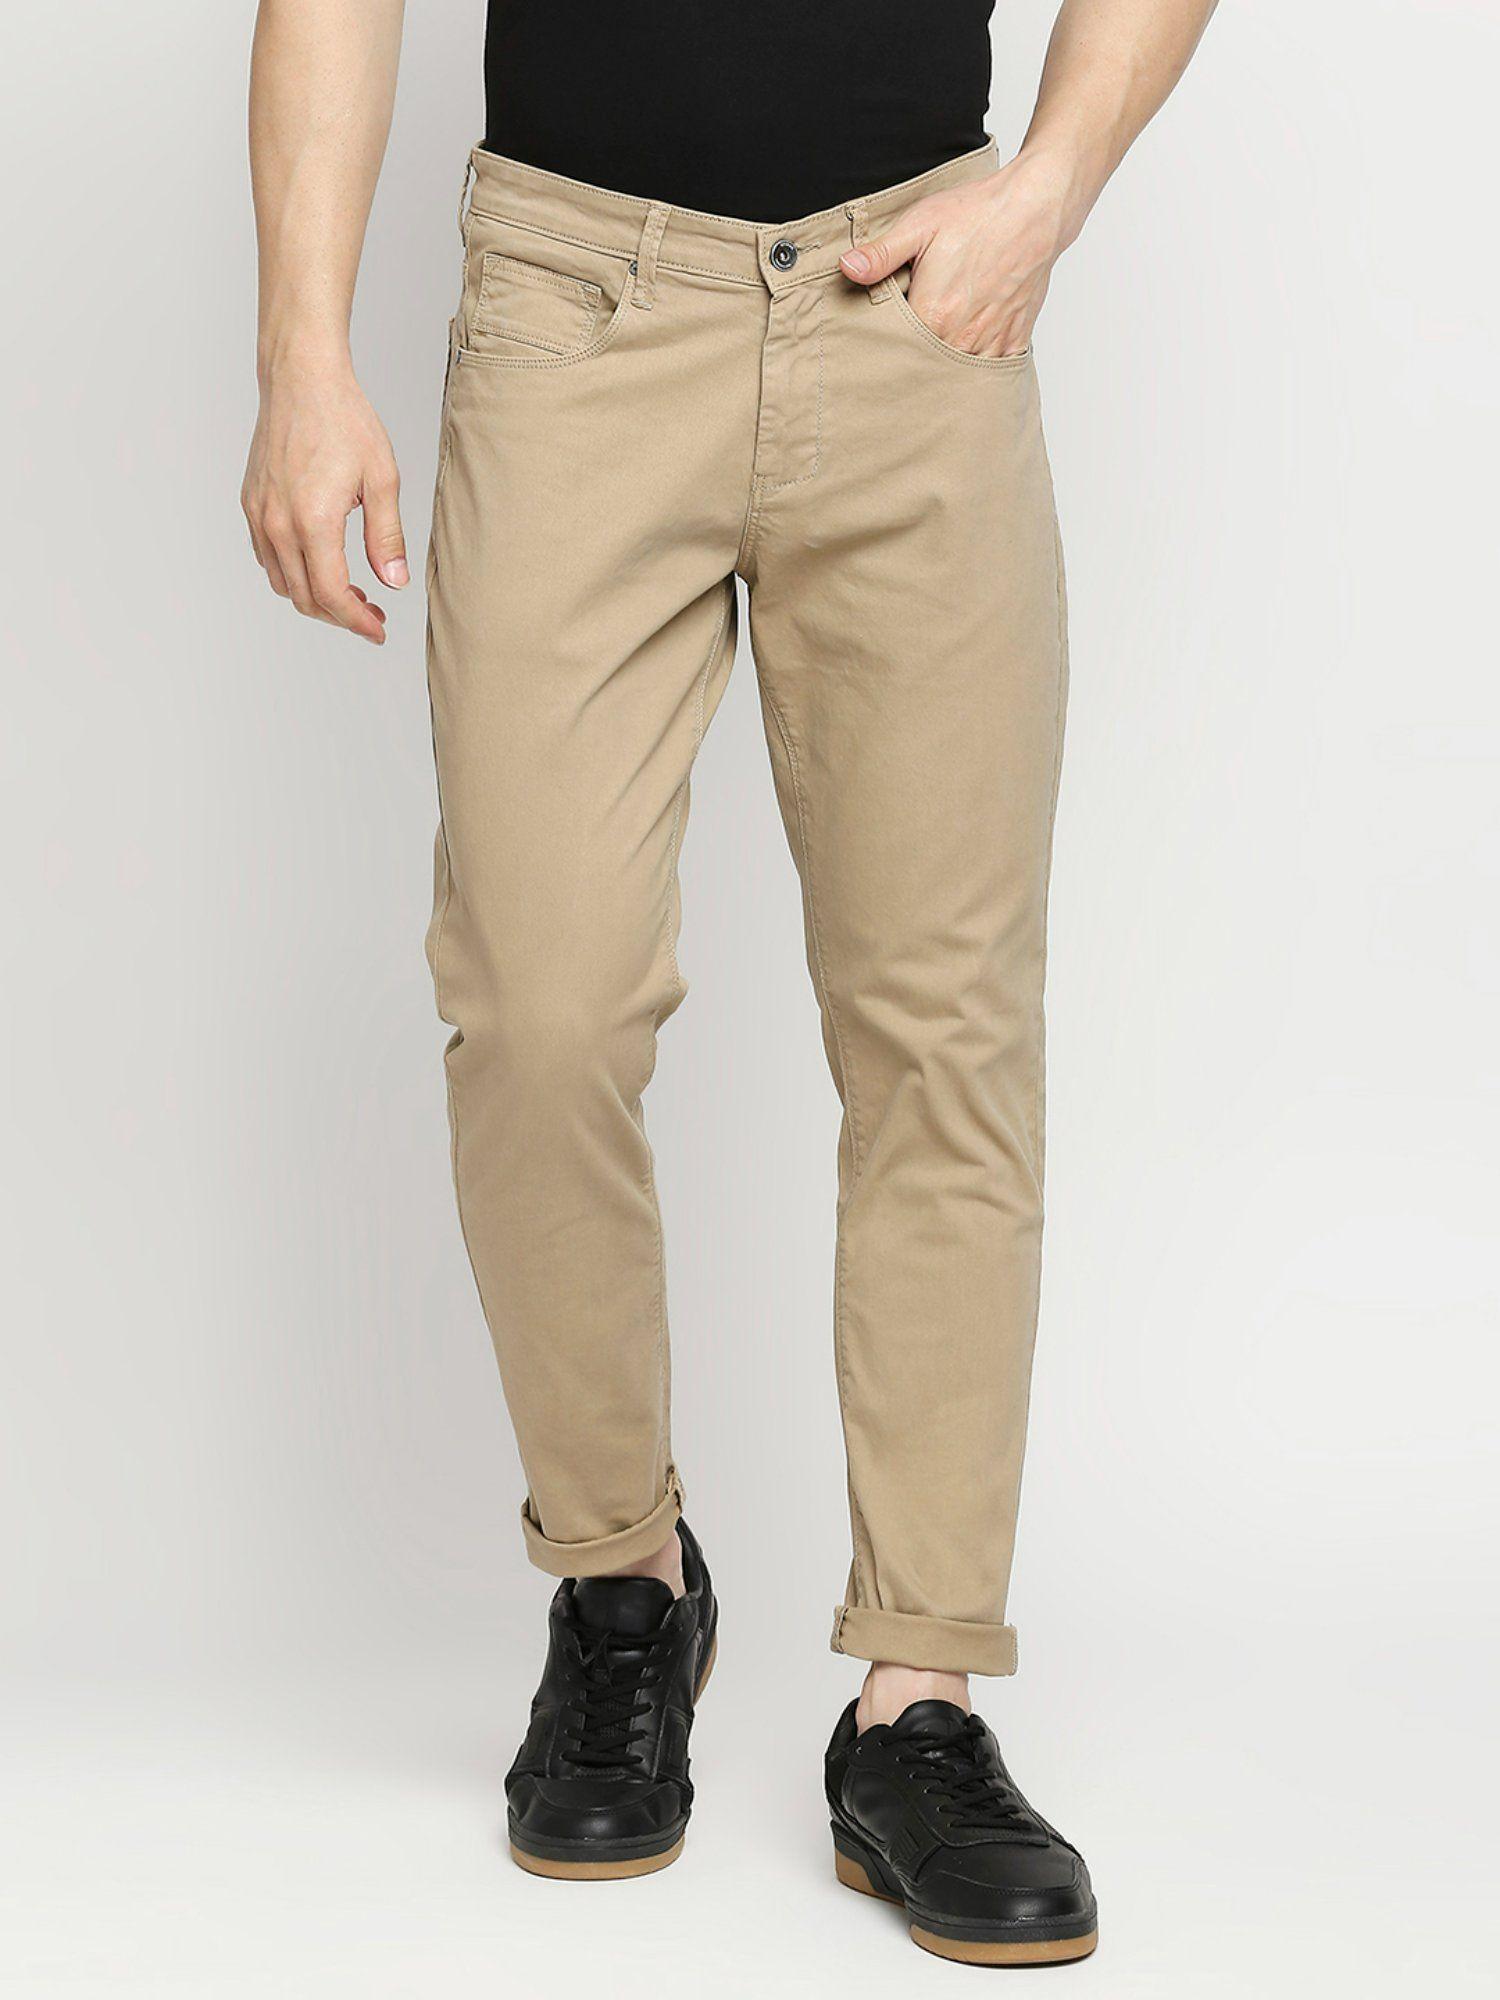 camel khaki cotton slim fit tapered length trousers for men